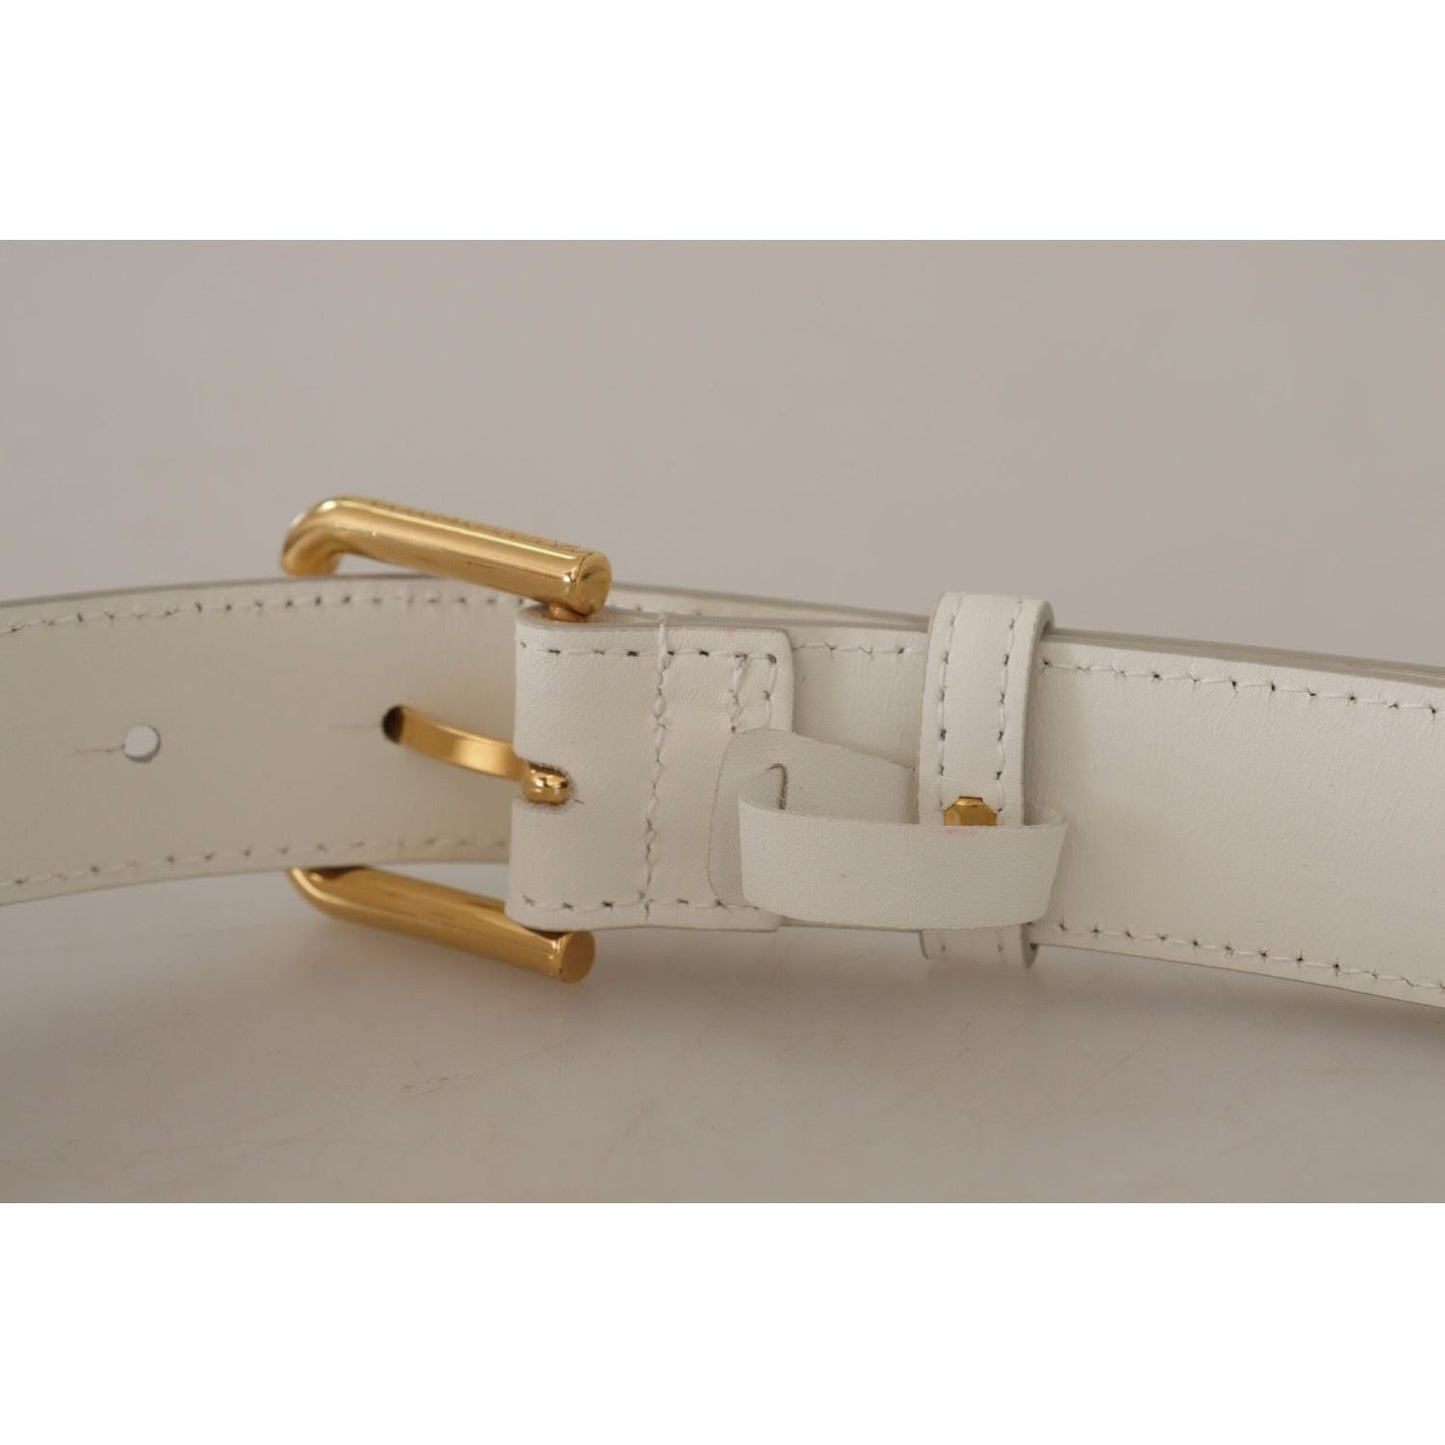 Dolce & Gabbana Chic White Leather Belt with Gold Engraved Buckle white-calf-leather-gold-tone-logo-metal-buckle-belt IMG_8046-1-scaled-a0855905-e5d.jpg